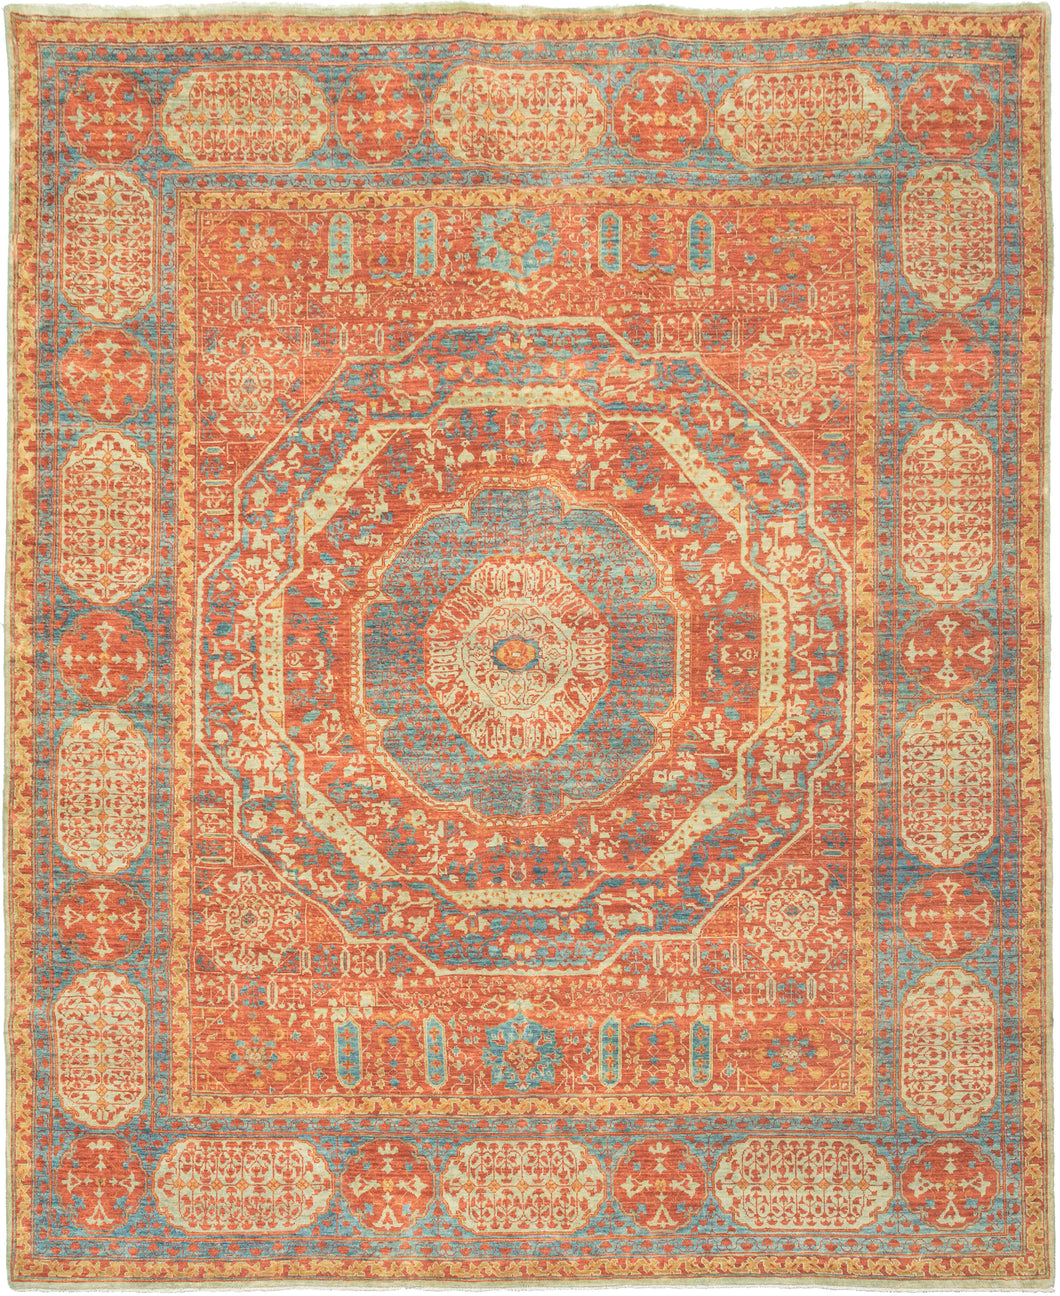 This Mamluk design rug was woven in India during the 21st century.  It features the distinctive patterning and color palette of classical Mamluk rugs. Mamluk rugs are a type of rug that was woven in Egypt during the 15th and 16th centuries. The graphic central medallion is formed of concentric shapes that gives the rendering a kaleidoscopic feel. Soft but lively tones of reds, blues, golds and greens are both striking and harmonious.